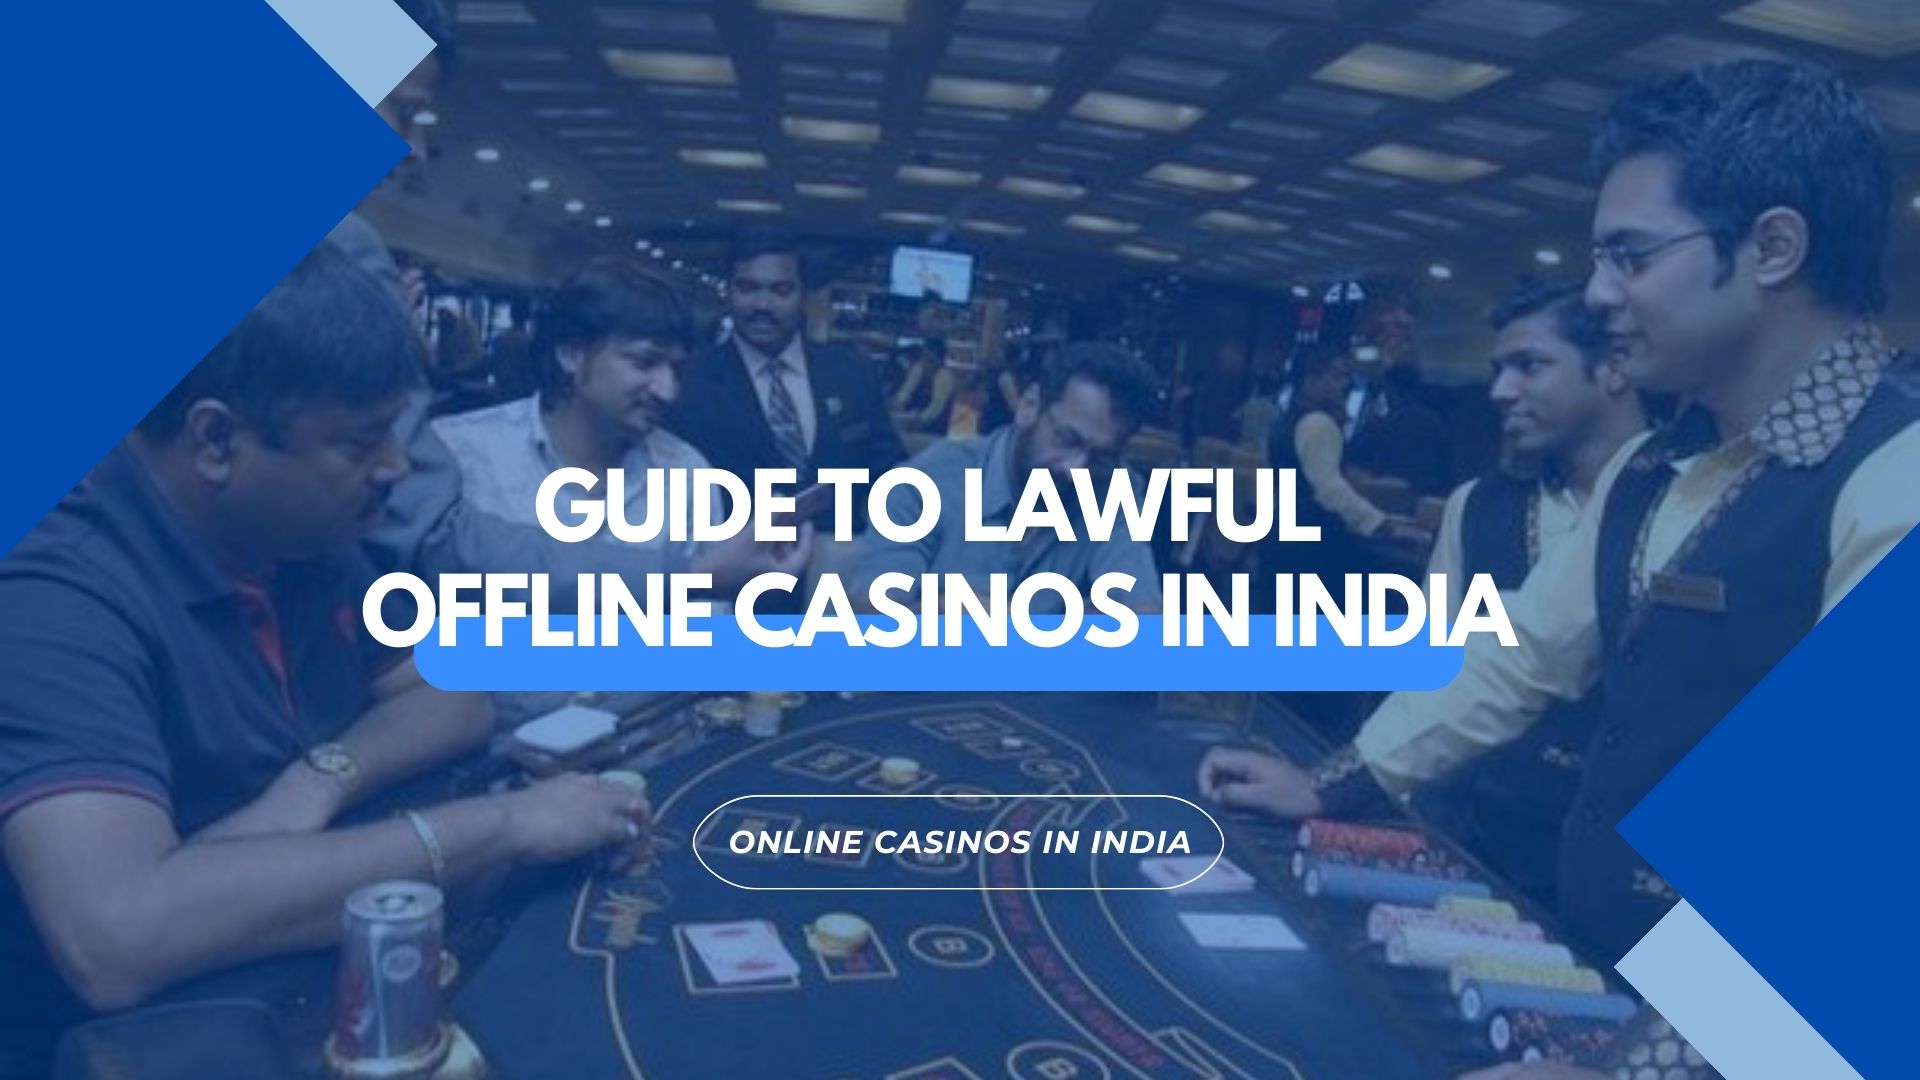 Complete Guide to Lawful Offline Casinos in India